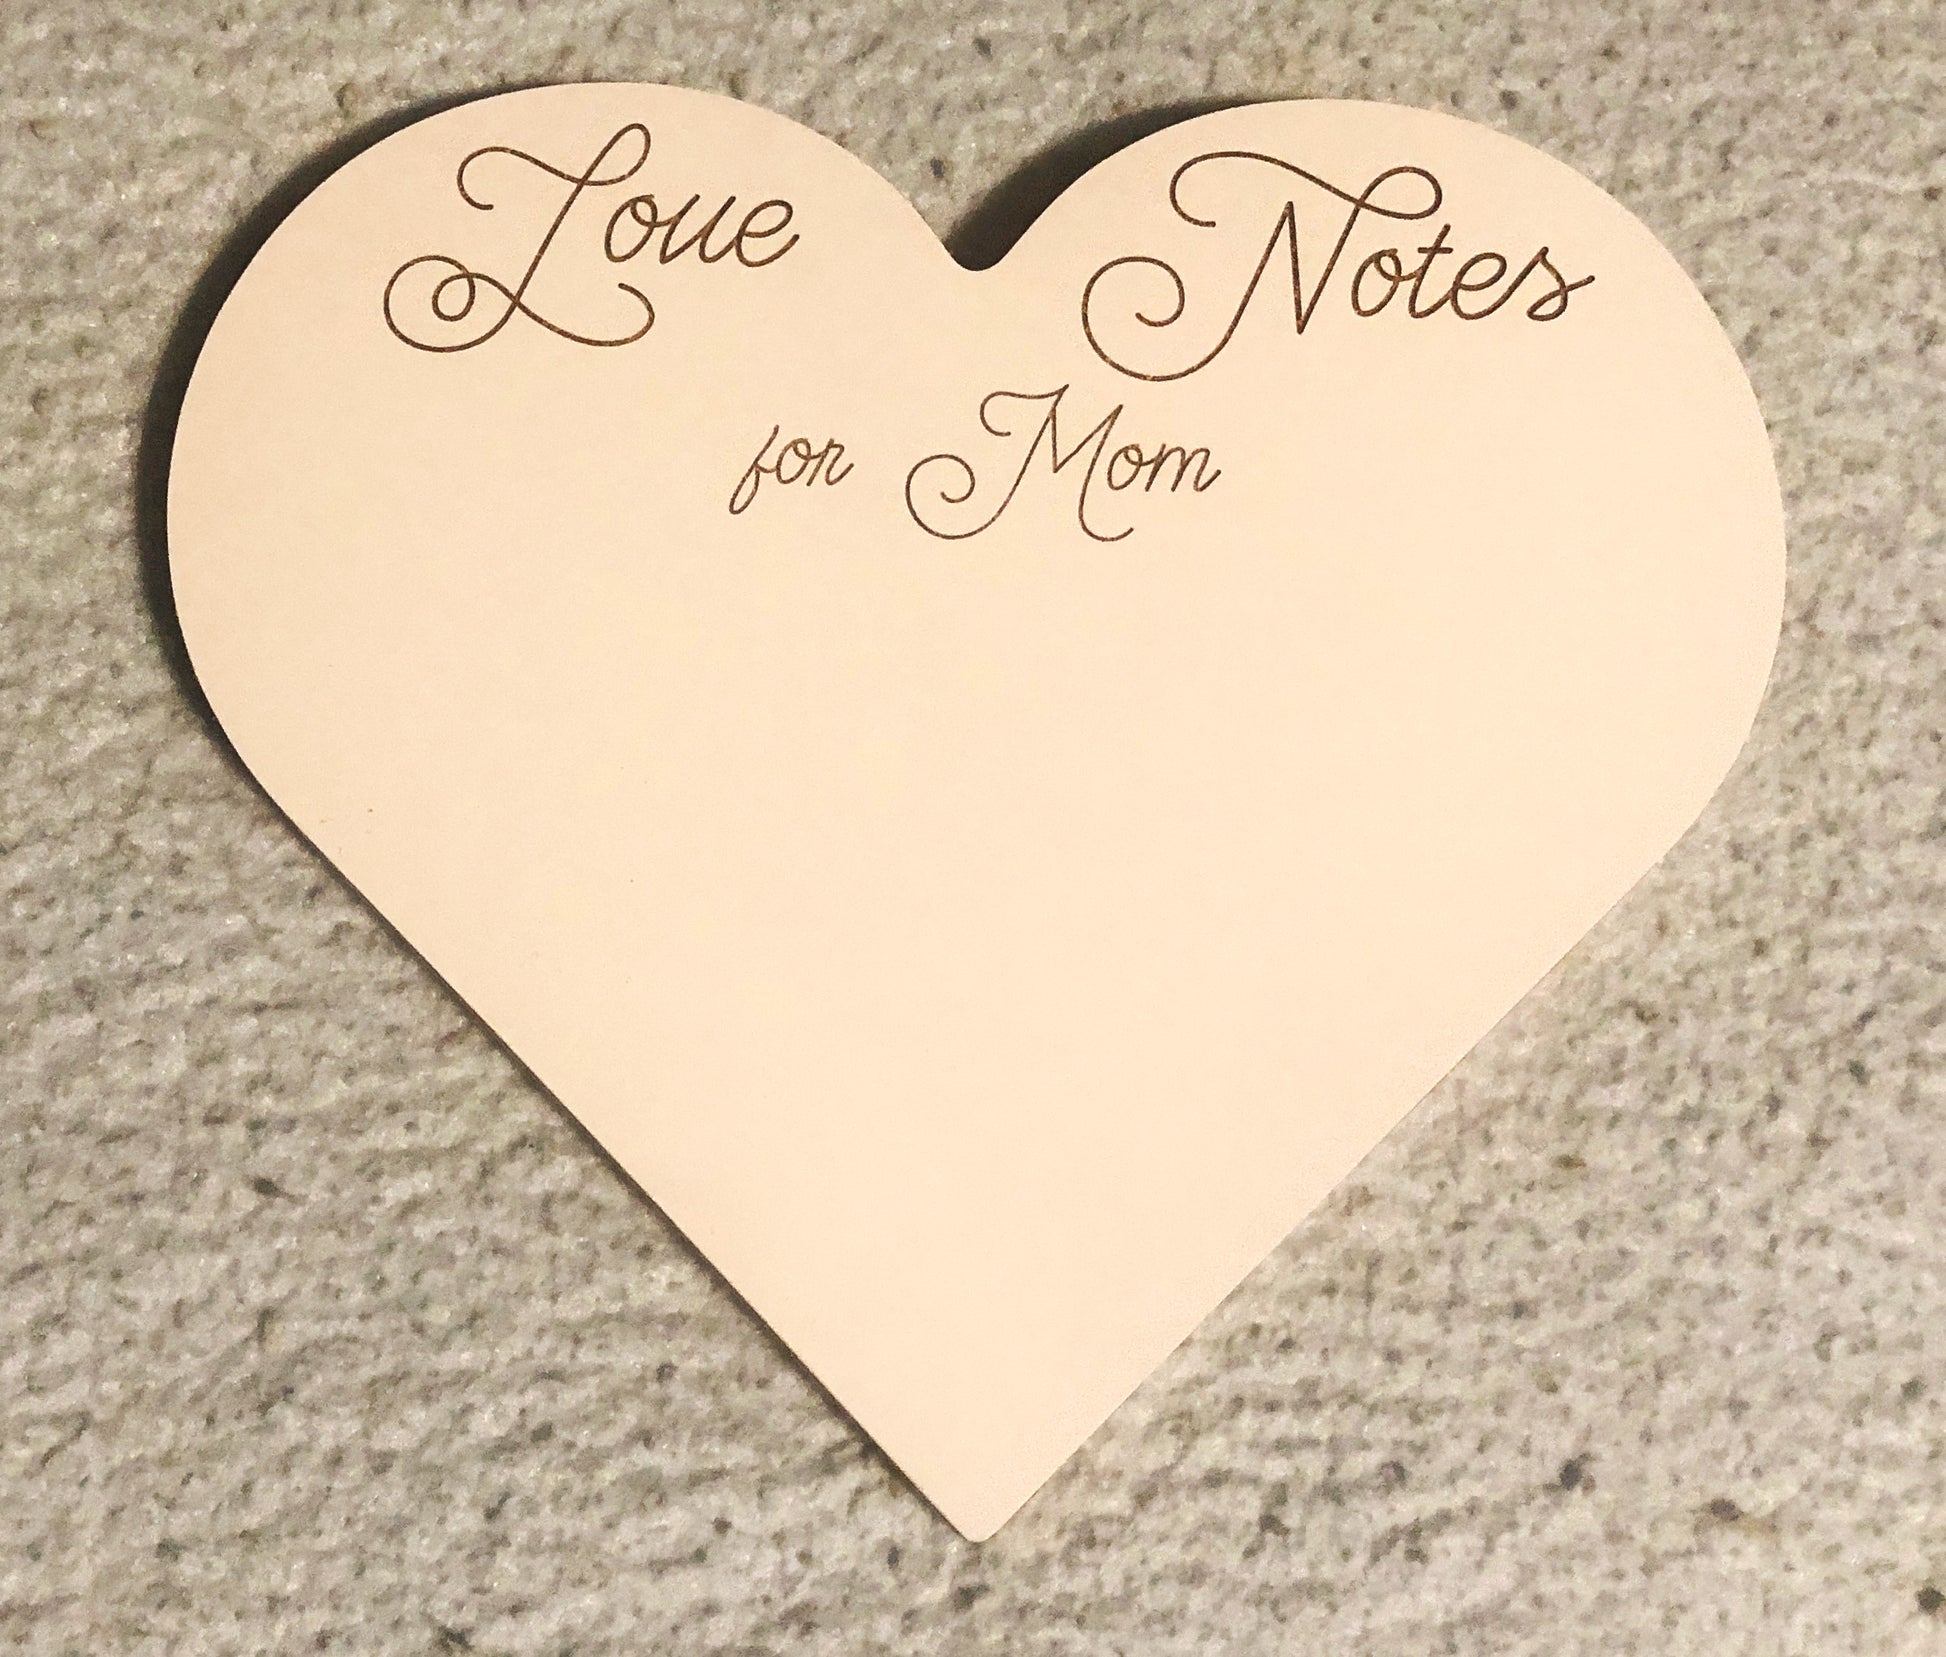 Heart shaped love Notes Message Board for Mom